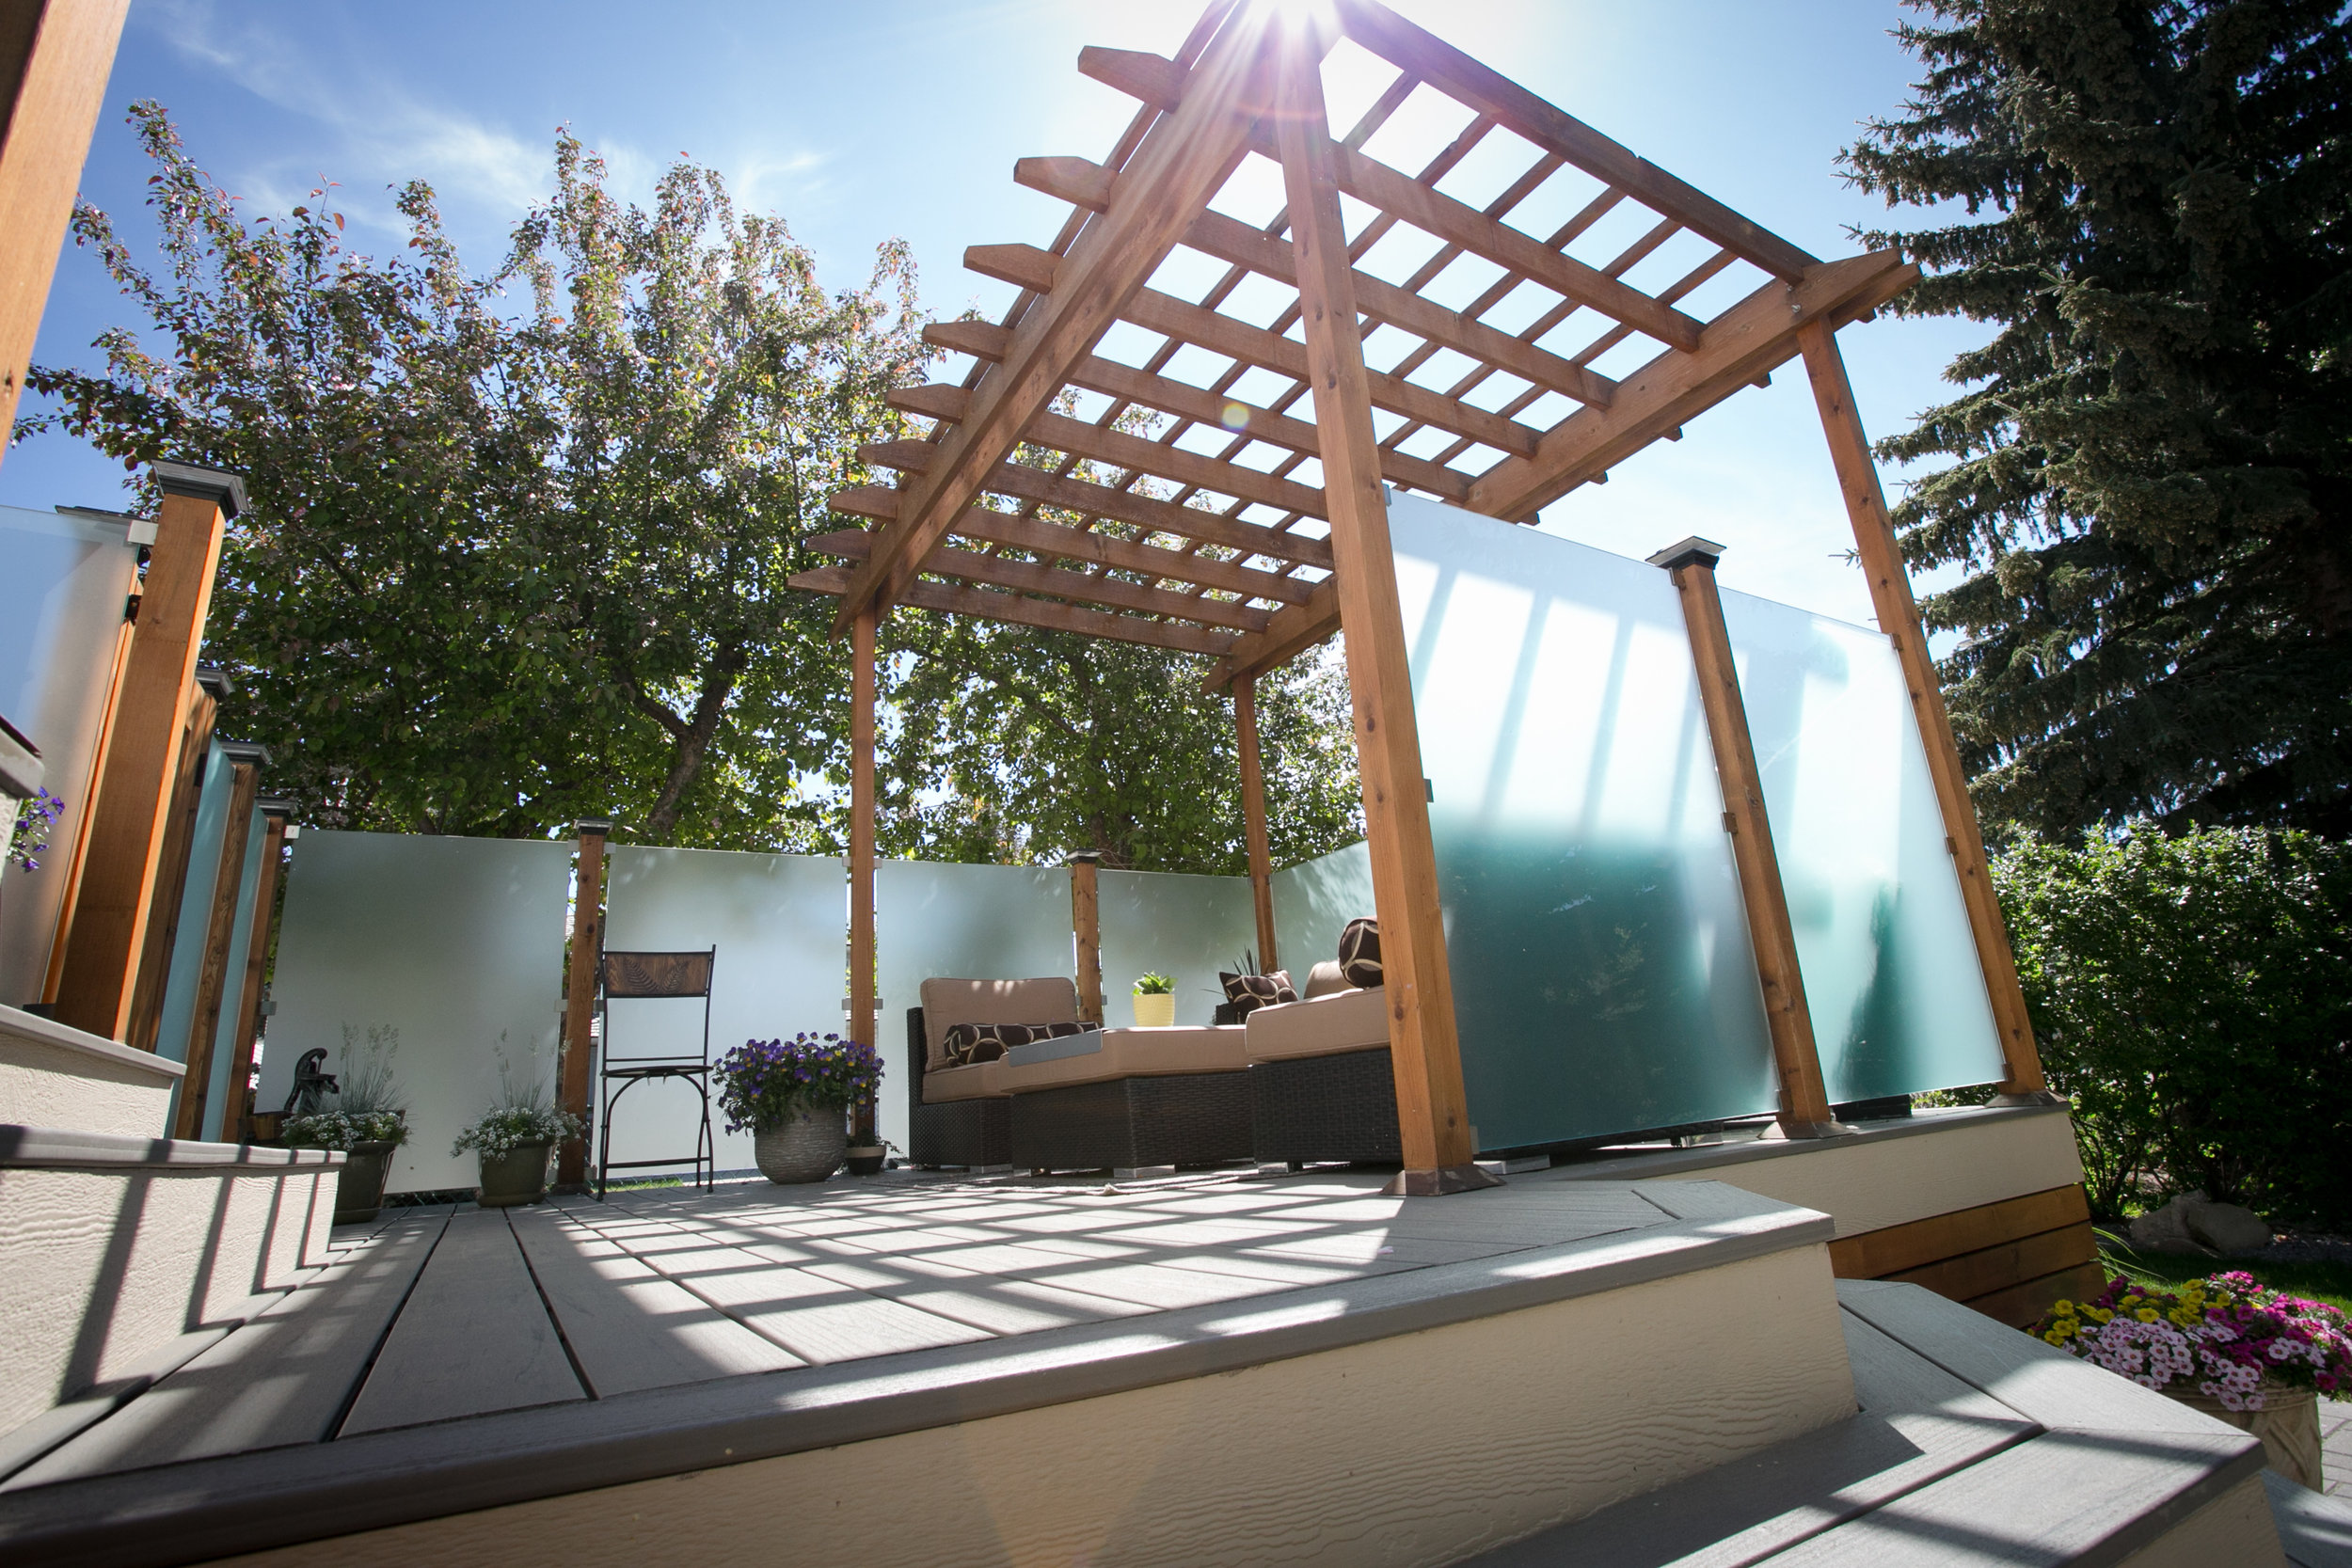  Composite decking, pergola and privacy panels with post-top lights — Valley Ridge, Calgary. 